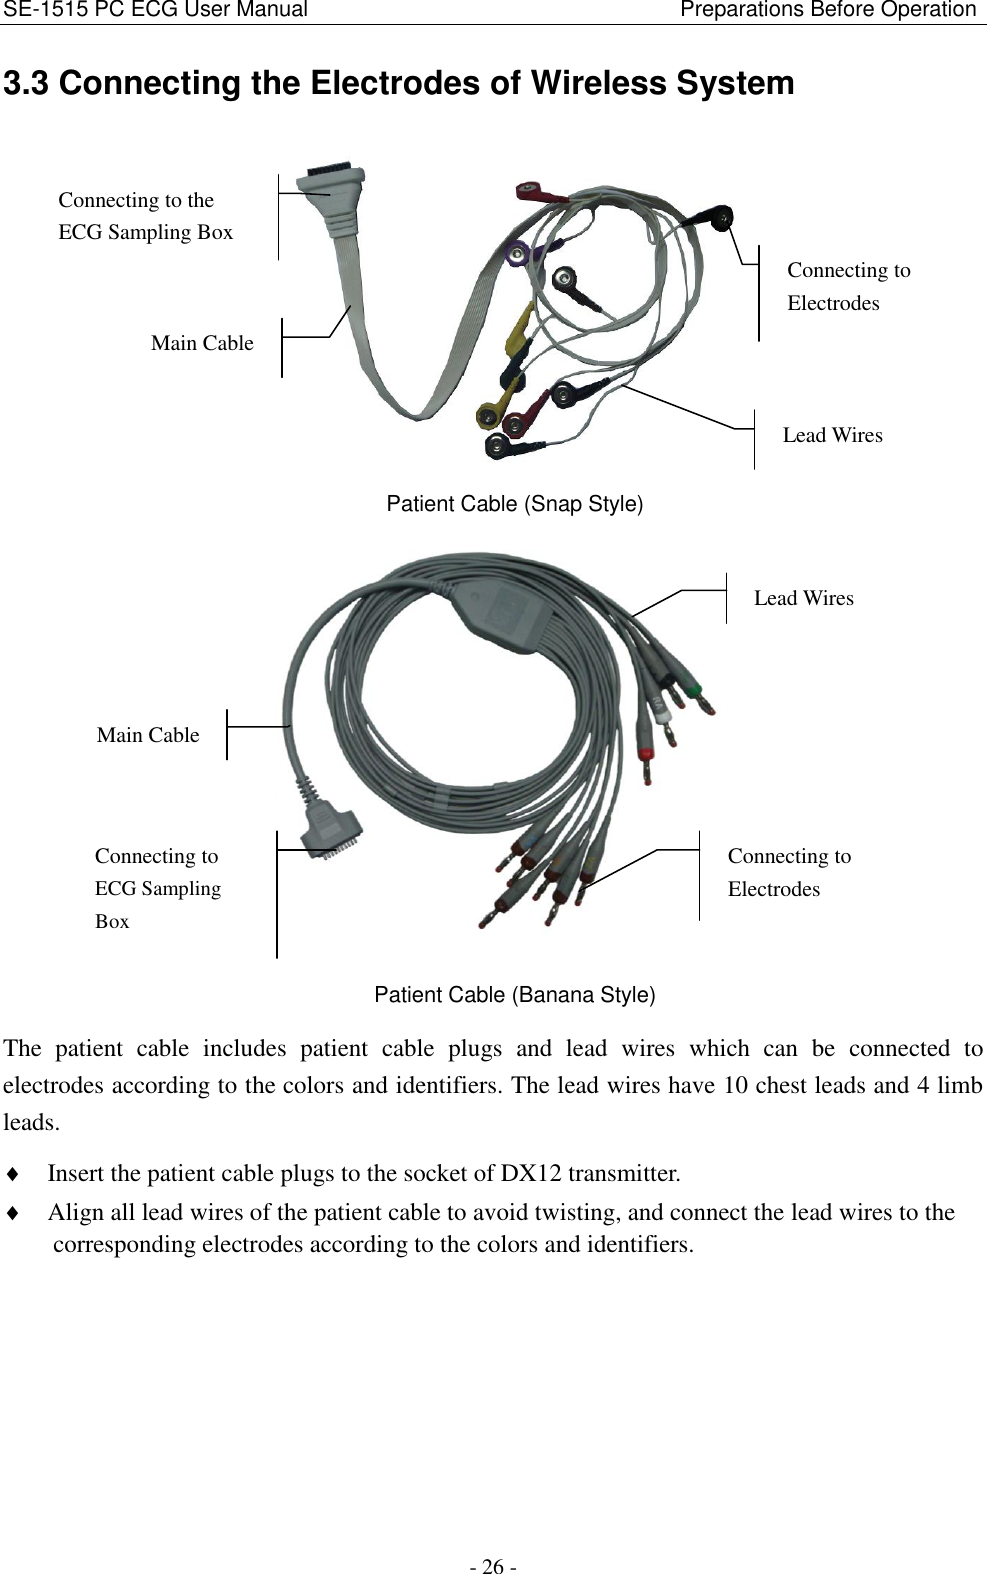 SE-1515 PC ECG User Manual                                                                    Preparations Before Operation - 26 - 3.3 Connecting the Electrodes of Wireless System  Patient Cable (Snap Style)  Patient Cable (Banana Style) The  patient  cable  includes  patient  cable  plugs  and  lead  wires  which  can  be  connected  to electrodes according to the colors and identifiers. The lead wires have 10 chest leads and 4 limb leads.  Insert the patient cable plugs to the socket of DX12 transmitter.  Align all lead wires of the patient cable to avoid twisting, and connect the lead wires to the corresponding electrodes according to the colors and identifiers.   Connecting to Electrodes  Lead Wires Connecting to ECG Sampling Box  Main Cable  Main Cable  Lead Wires  Connecting to the ECG Sampling Box  Connecting to Electrodes  